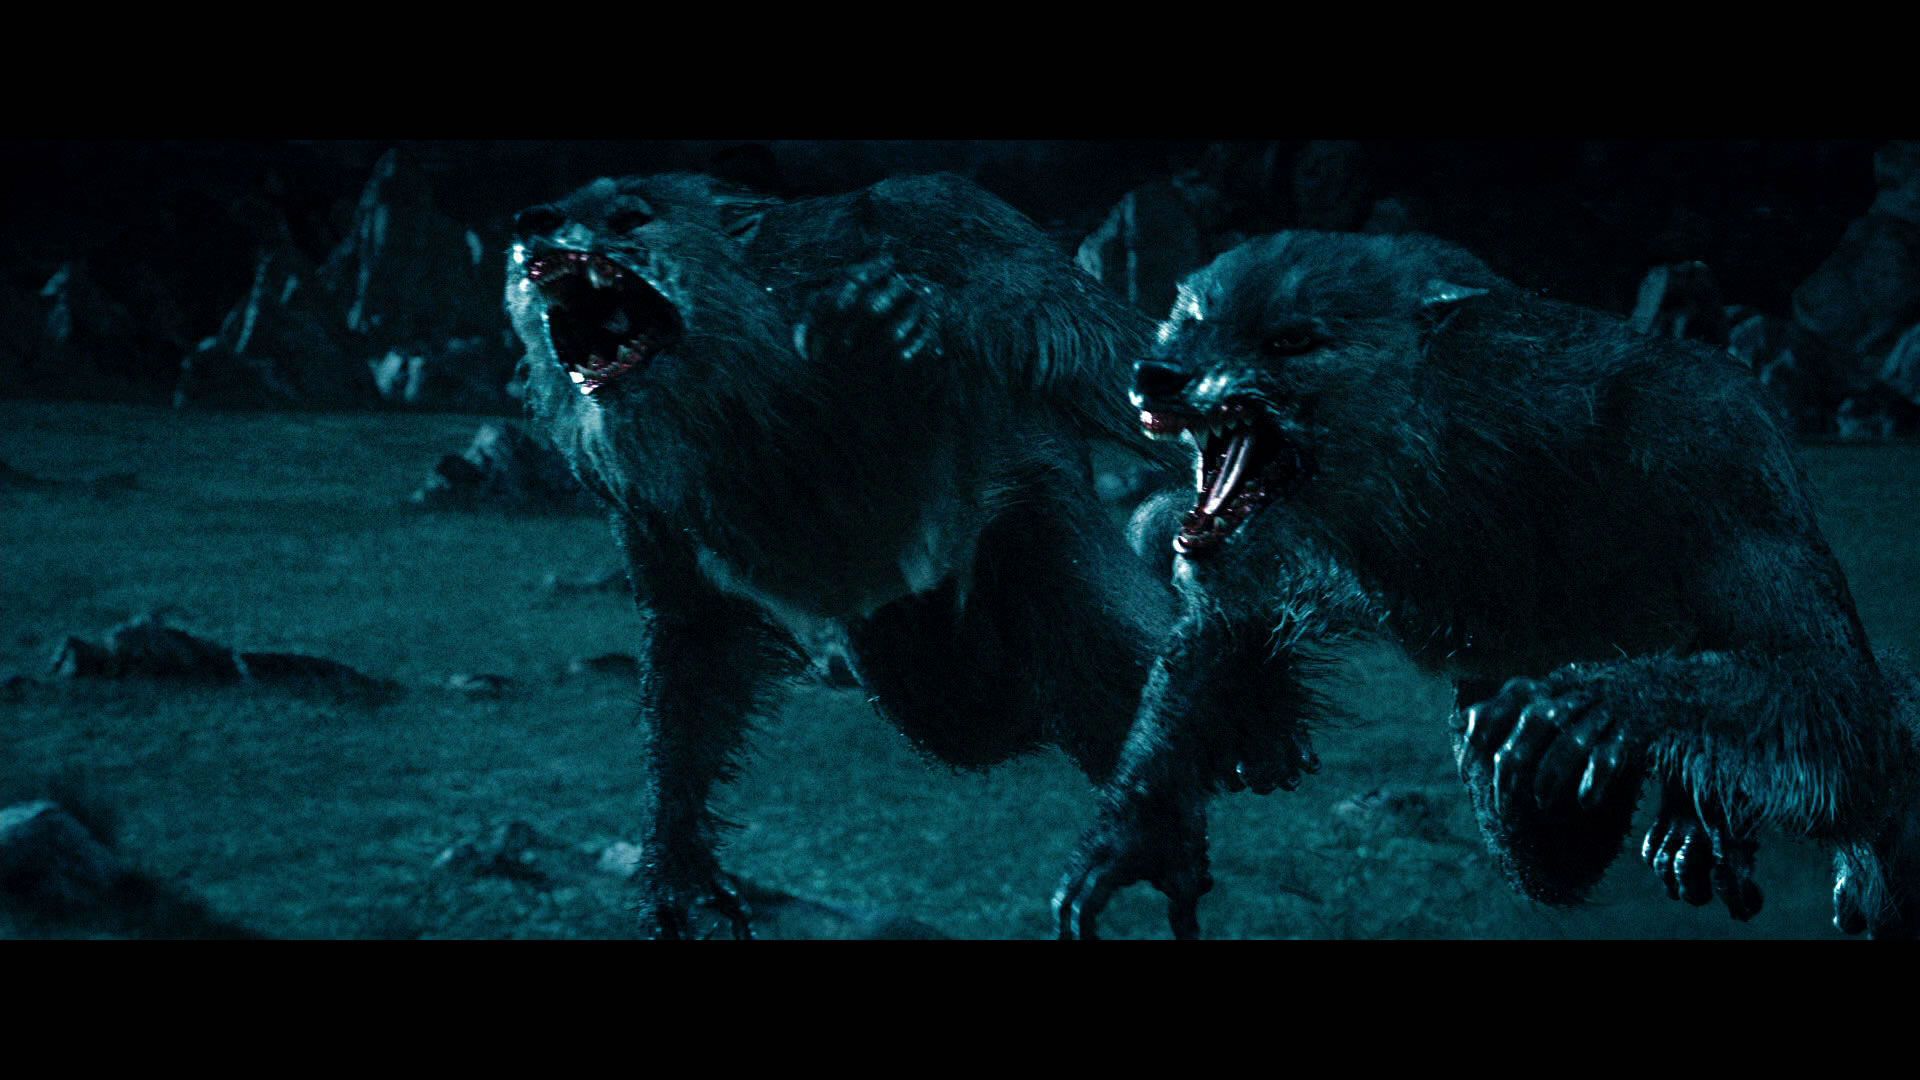 Underworld: Rise Of The Lycans Wallpapers